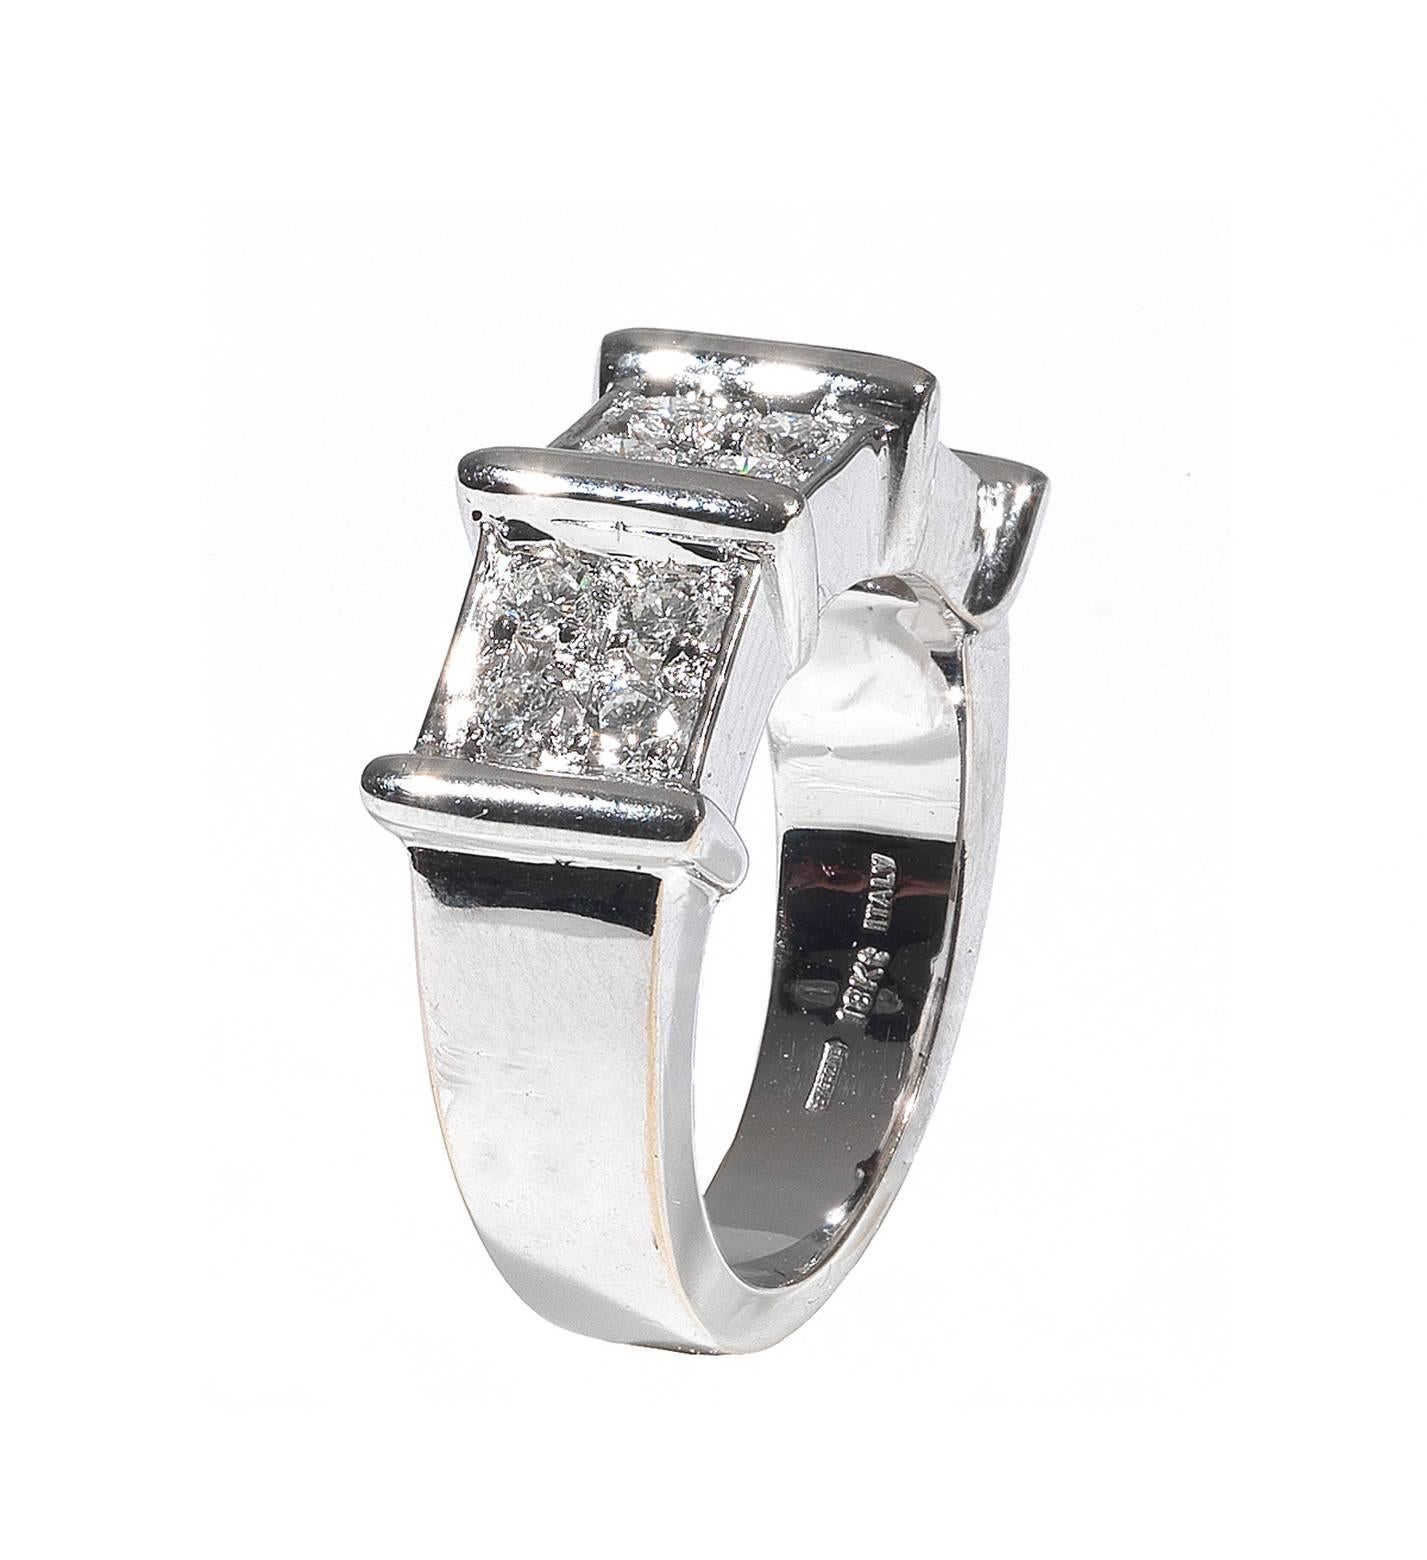 Designed as a band divided in three section set with claw set round cut diamonds

Mounted in 18Kt white gold

Finger size: 6 1/2

Weight: 11.3 gr
